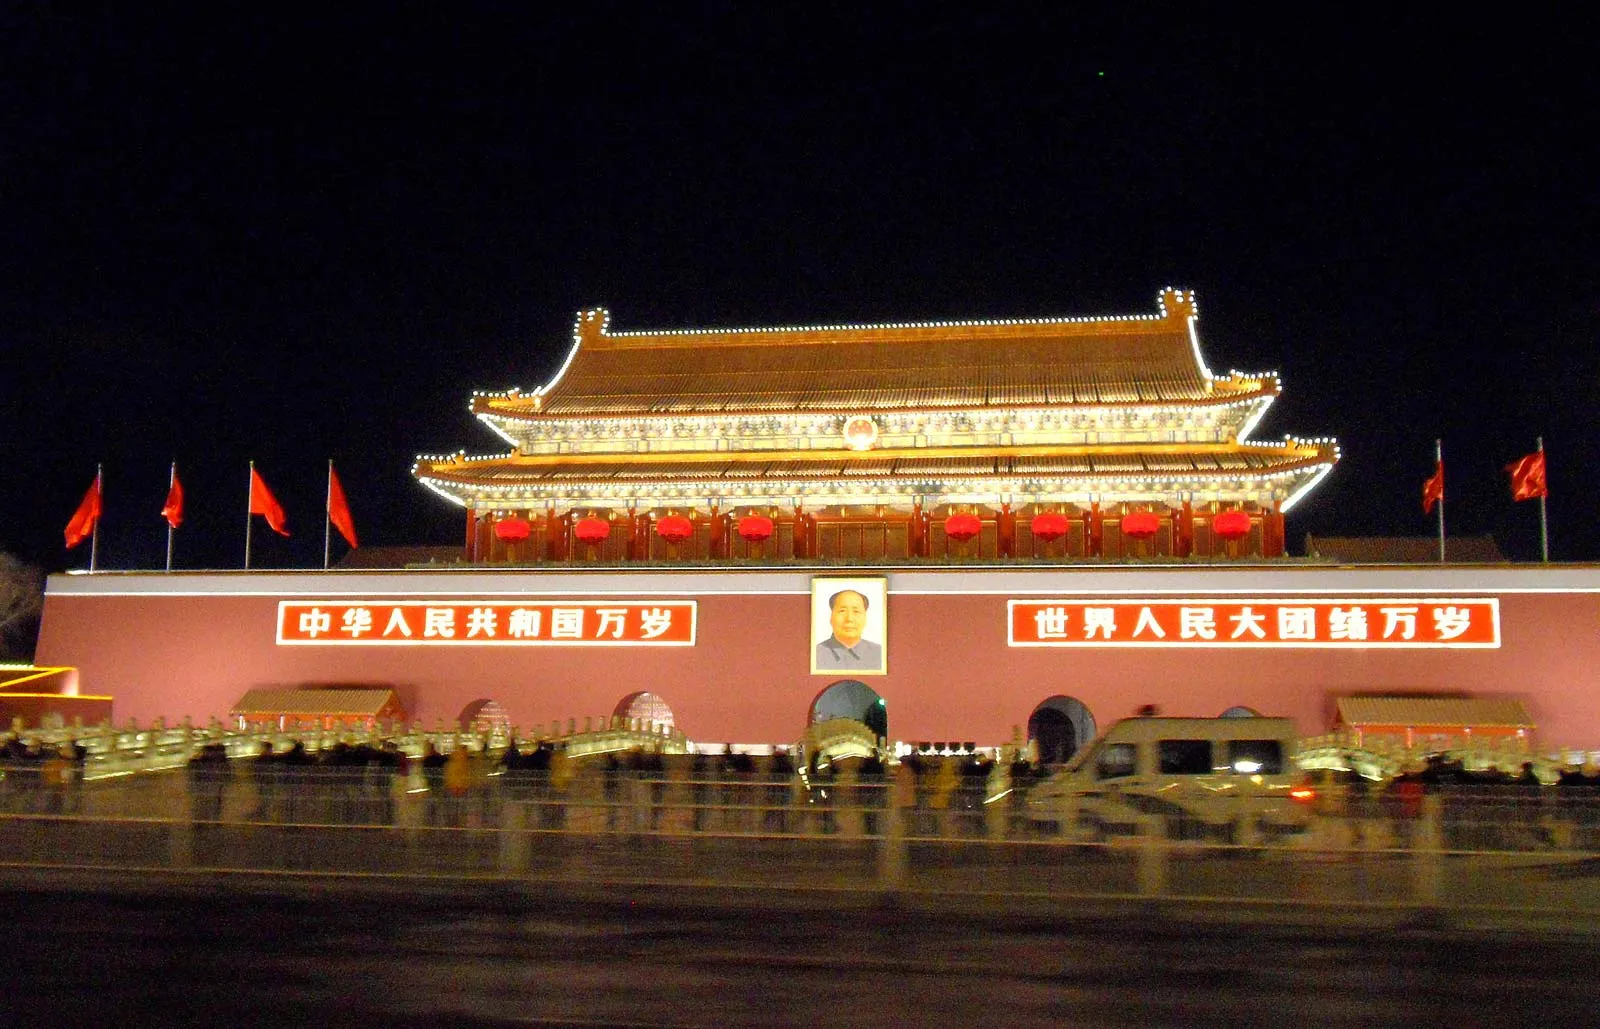 15 Interesting Forbidden City Facts You Didn't Know